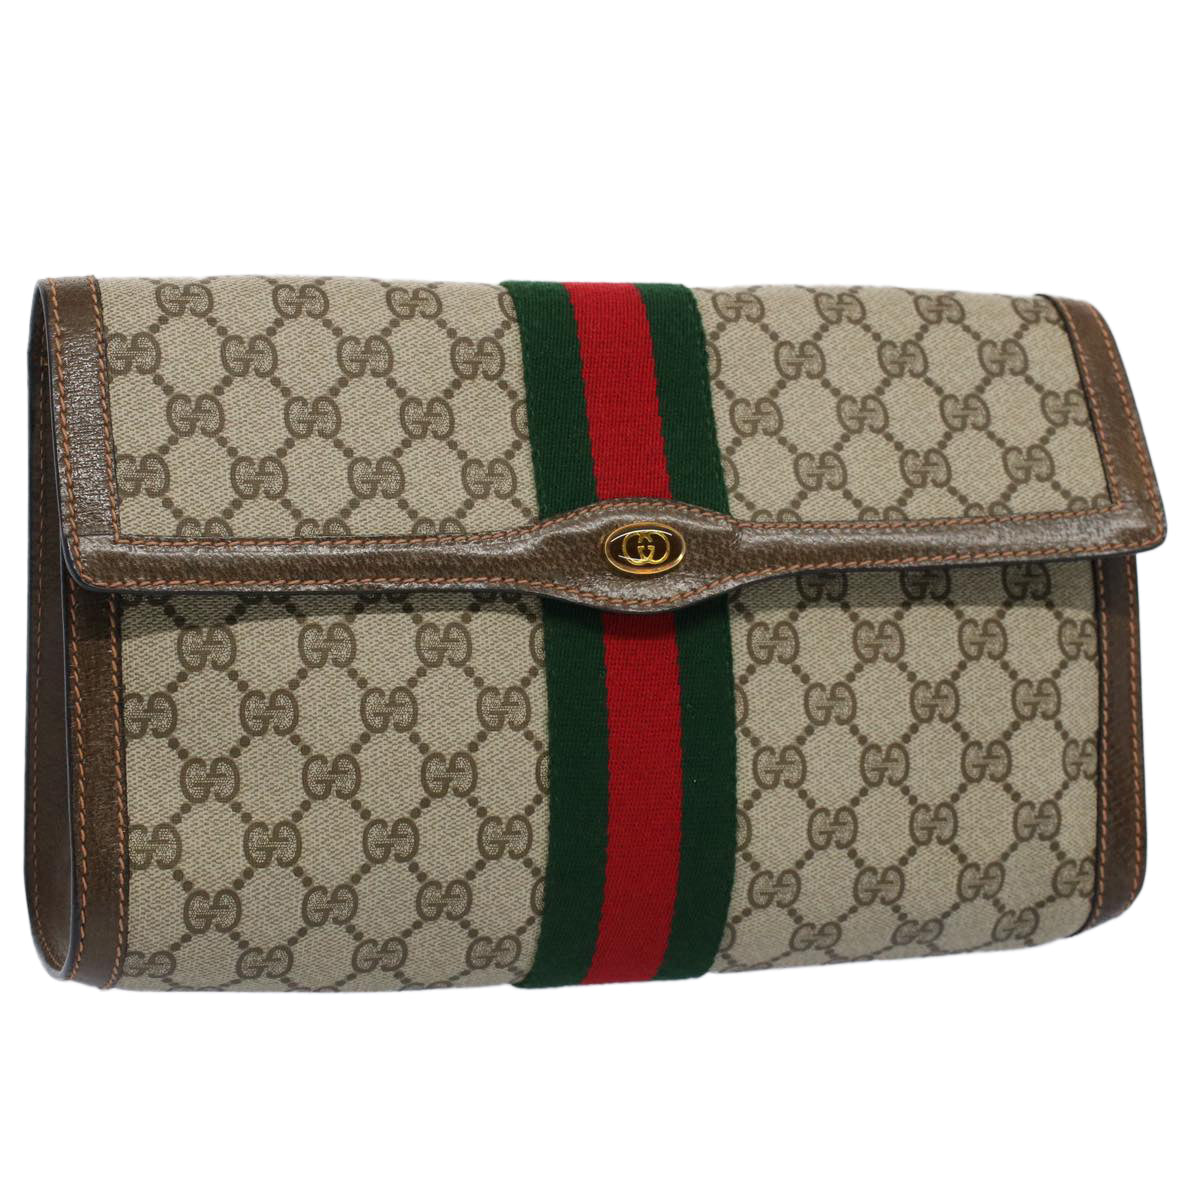 GUCCI GUCCI Shoulder Bag crossbody 745679 canvas GG Supreme Brown Beige Used  Women 745679｜Product Code：2101217670838｜BRAND OFF Online Store